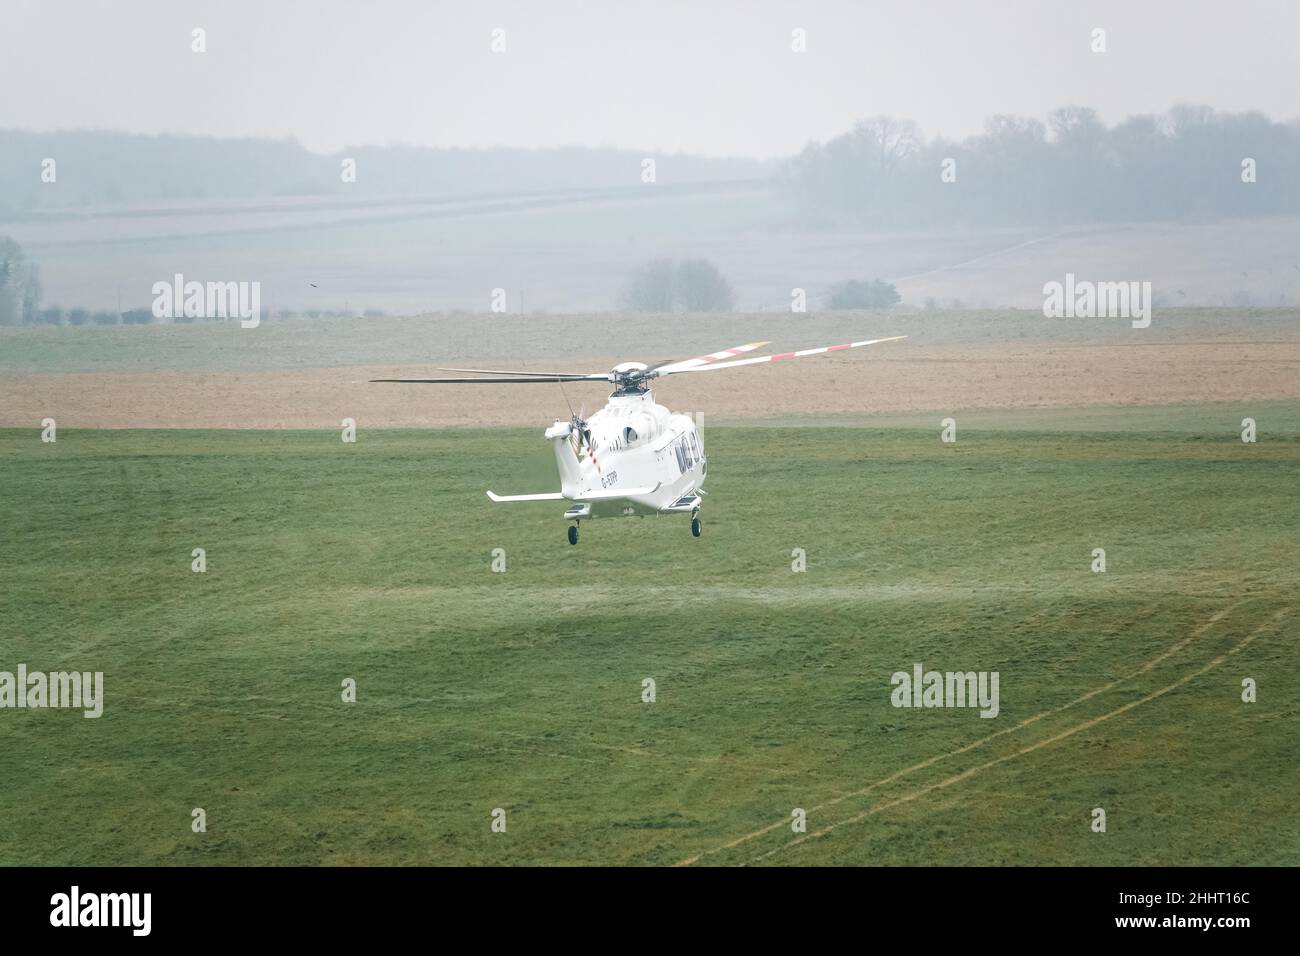 G-ETPP ETPS Agusta AW139 helicopter hovering just above grass on a military pilot training flight exercise, Wiltshire UK Stock Photo